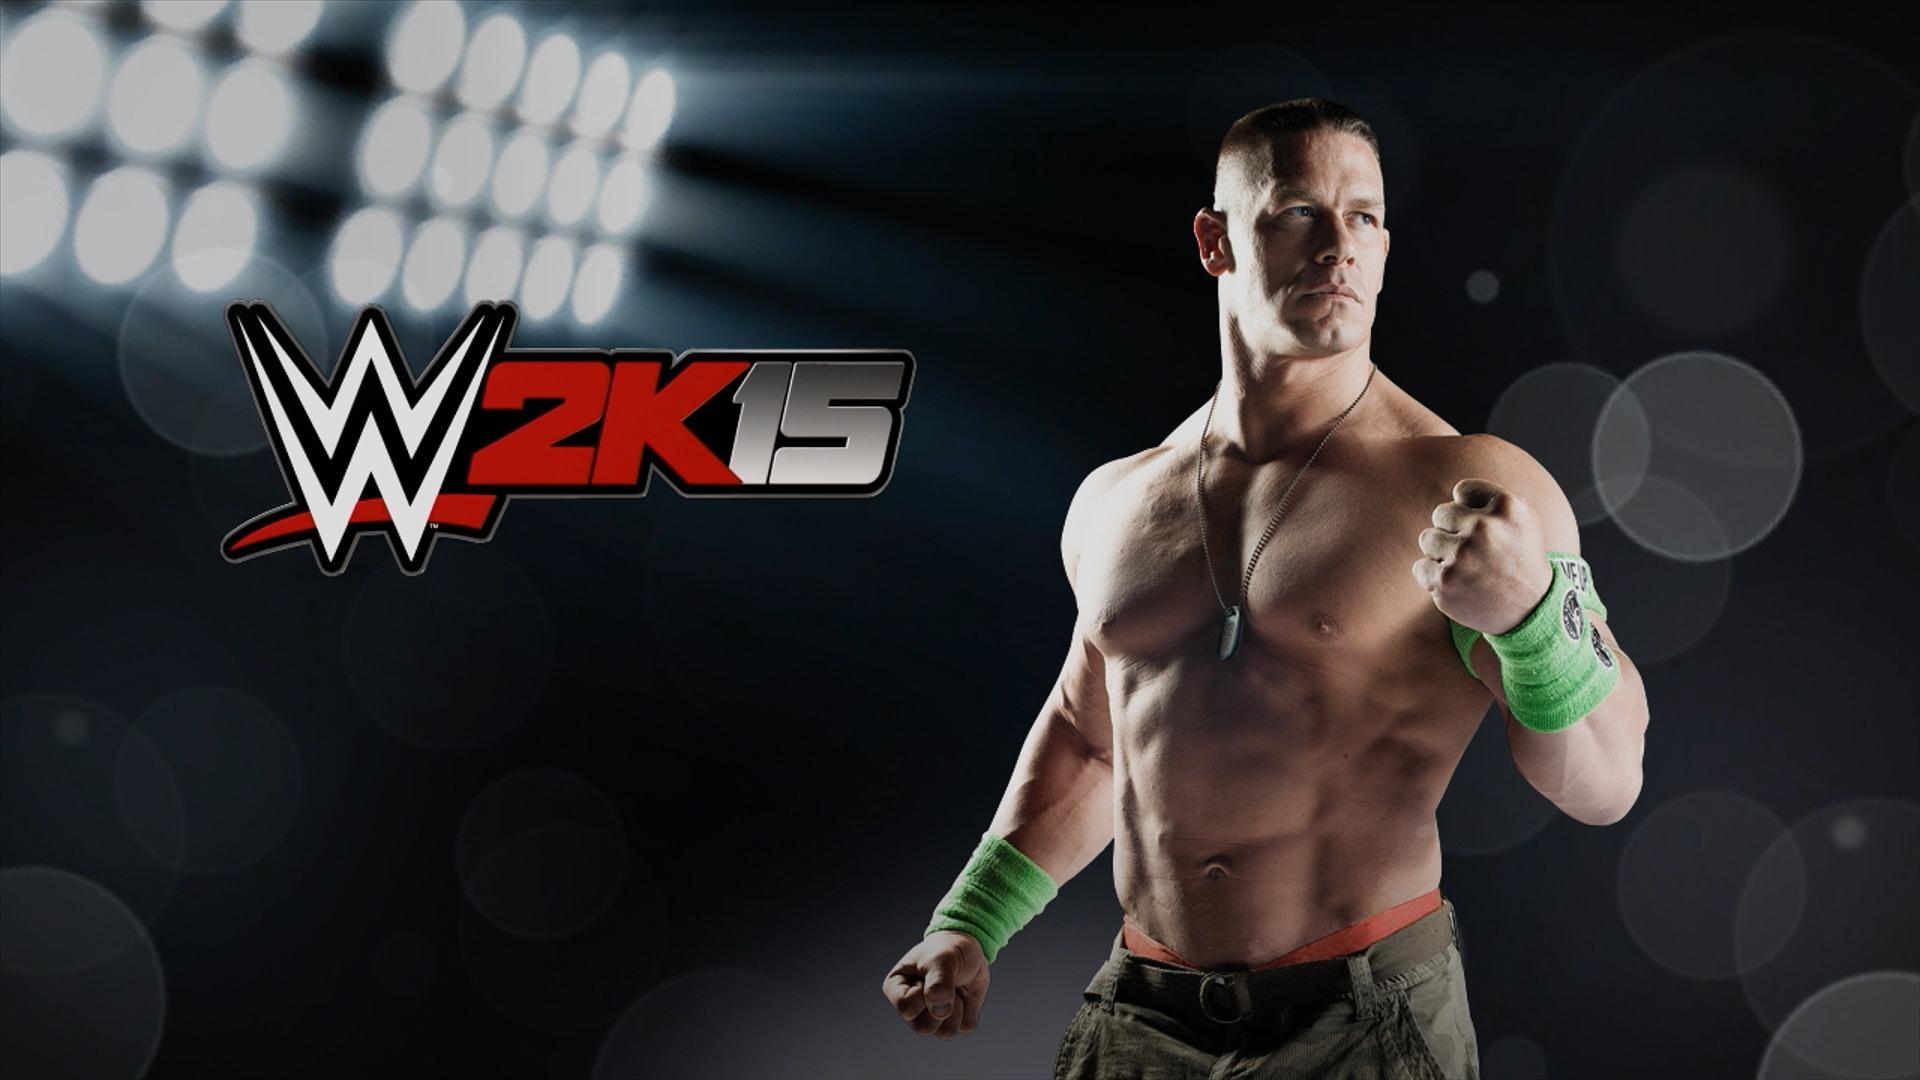 Top Rated HD Quality Wwe 2k15 Image